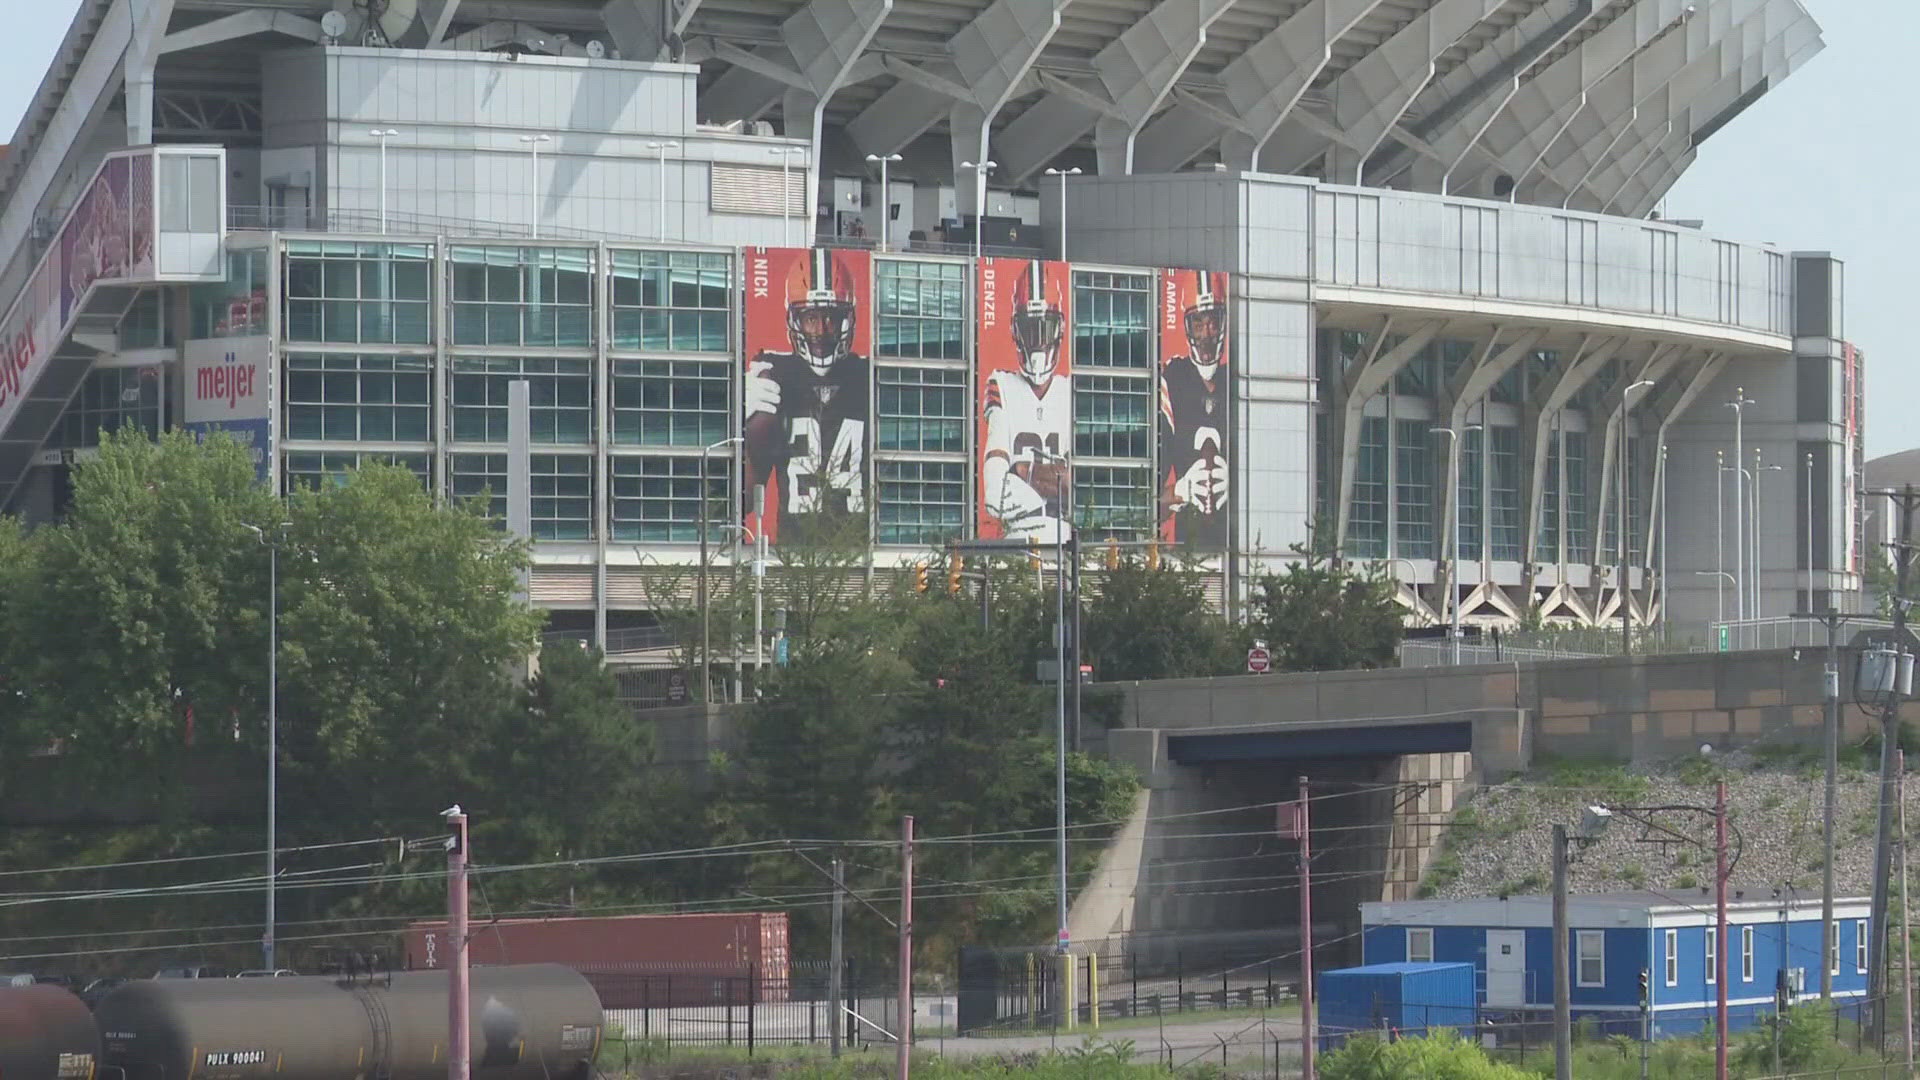 The Browns have been rumored to be looking at Brook Park for a new stadium. The law could potentially create hurdles for any move outside the city, even the suburbs.